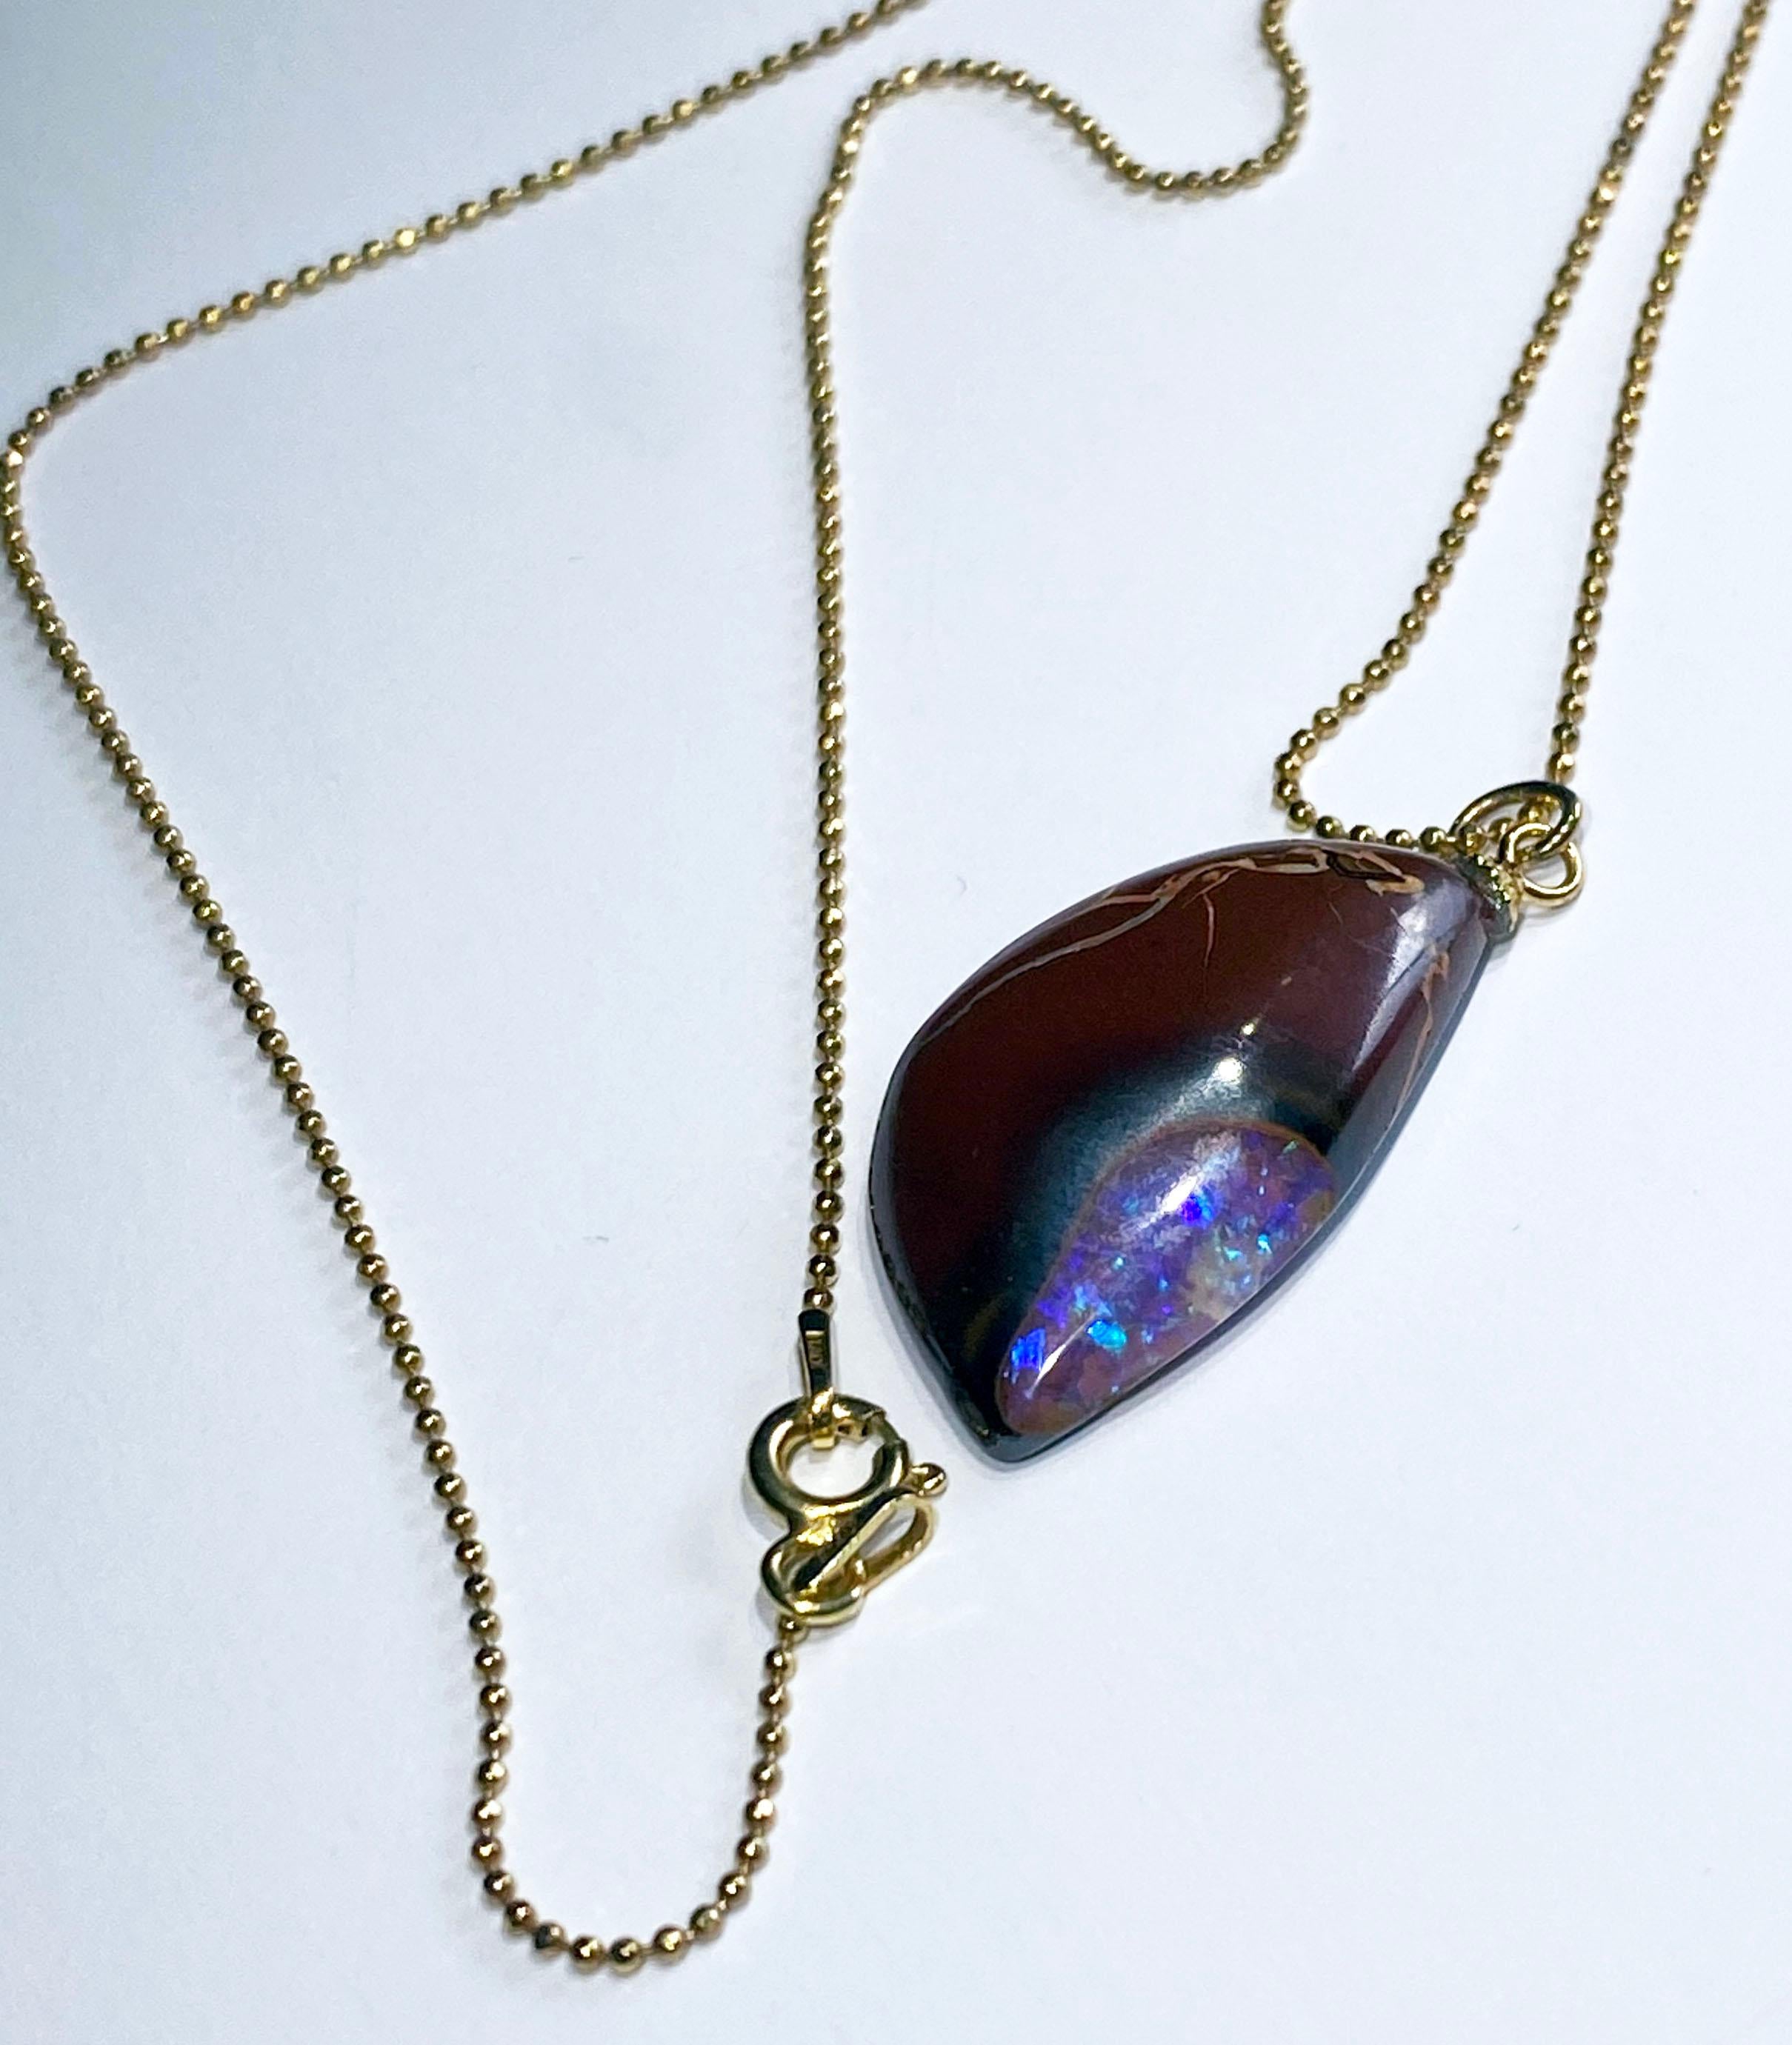 Cabochon Boulder Opal Pendant on a Gold-Plated Silver Chain For Sale